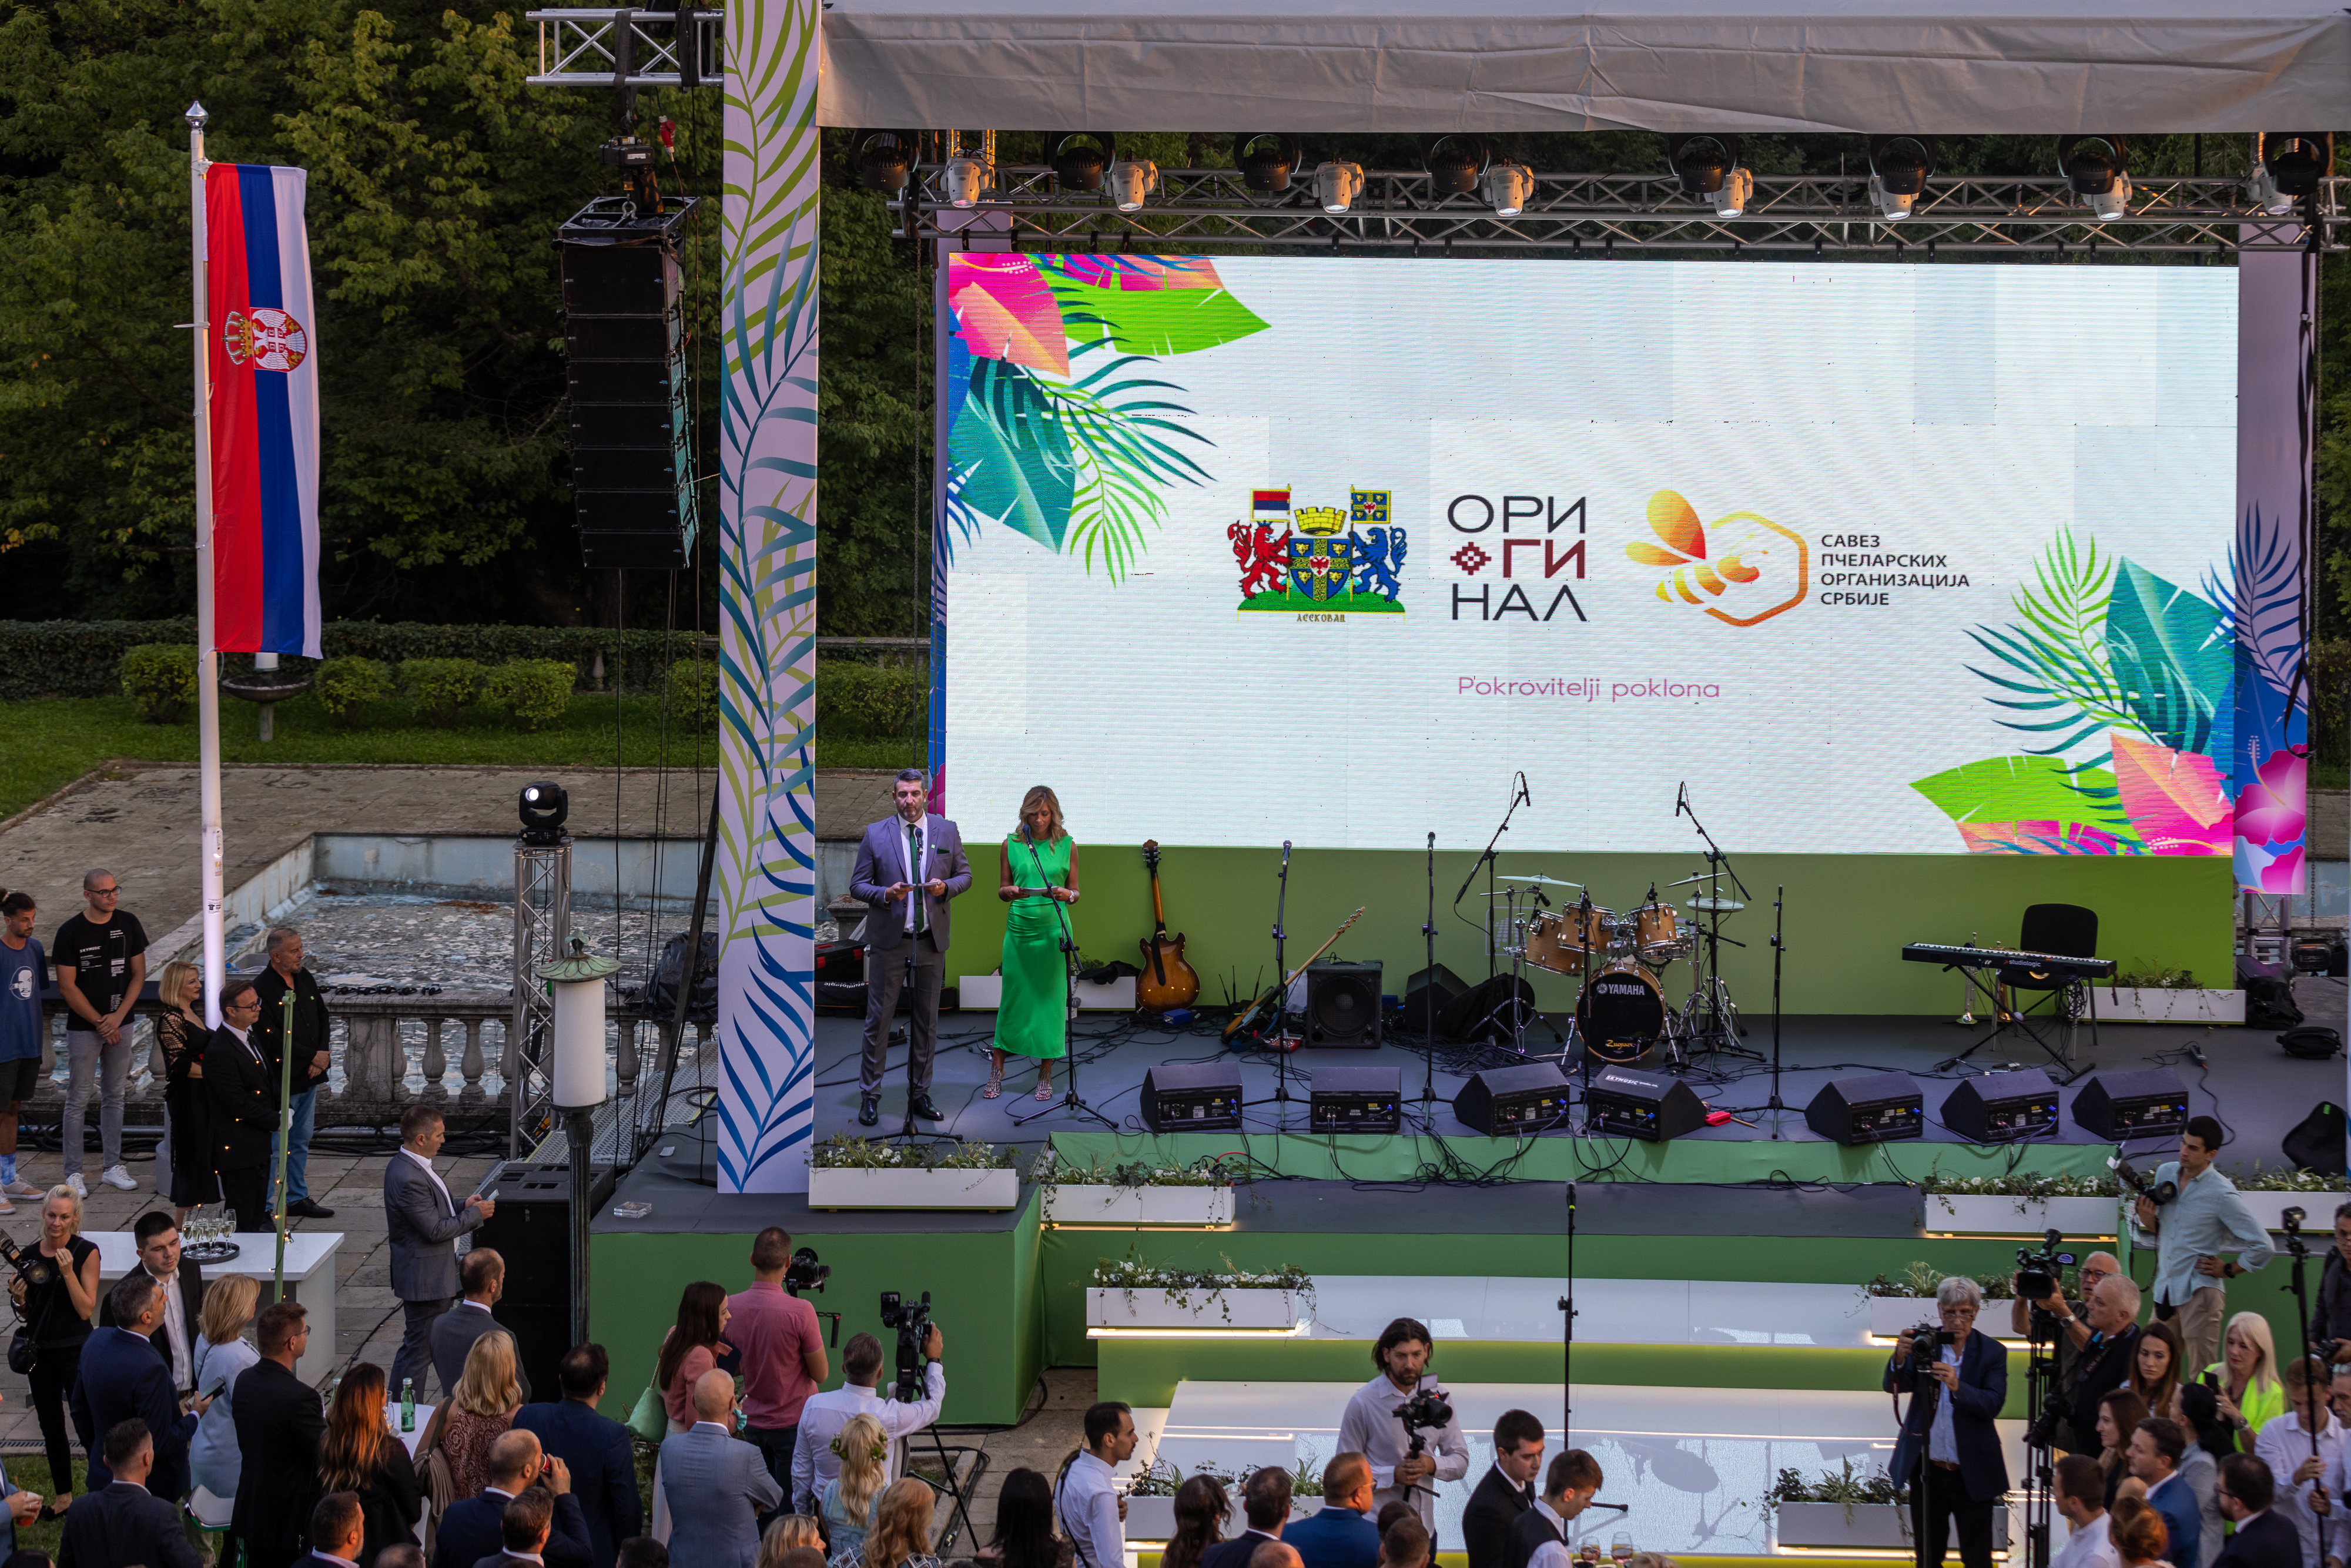 More than 1,000 guests joined the celebration of green-inspired September Gathering